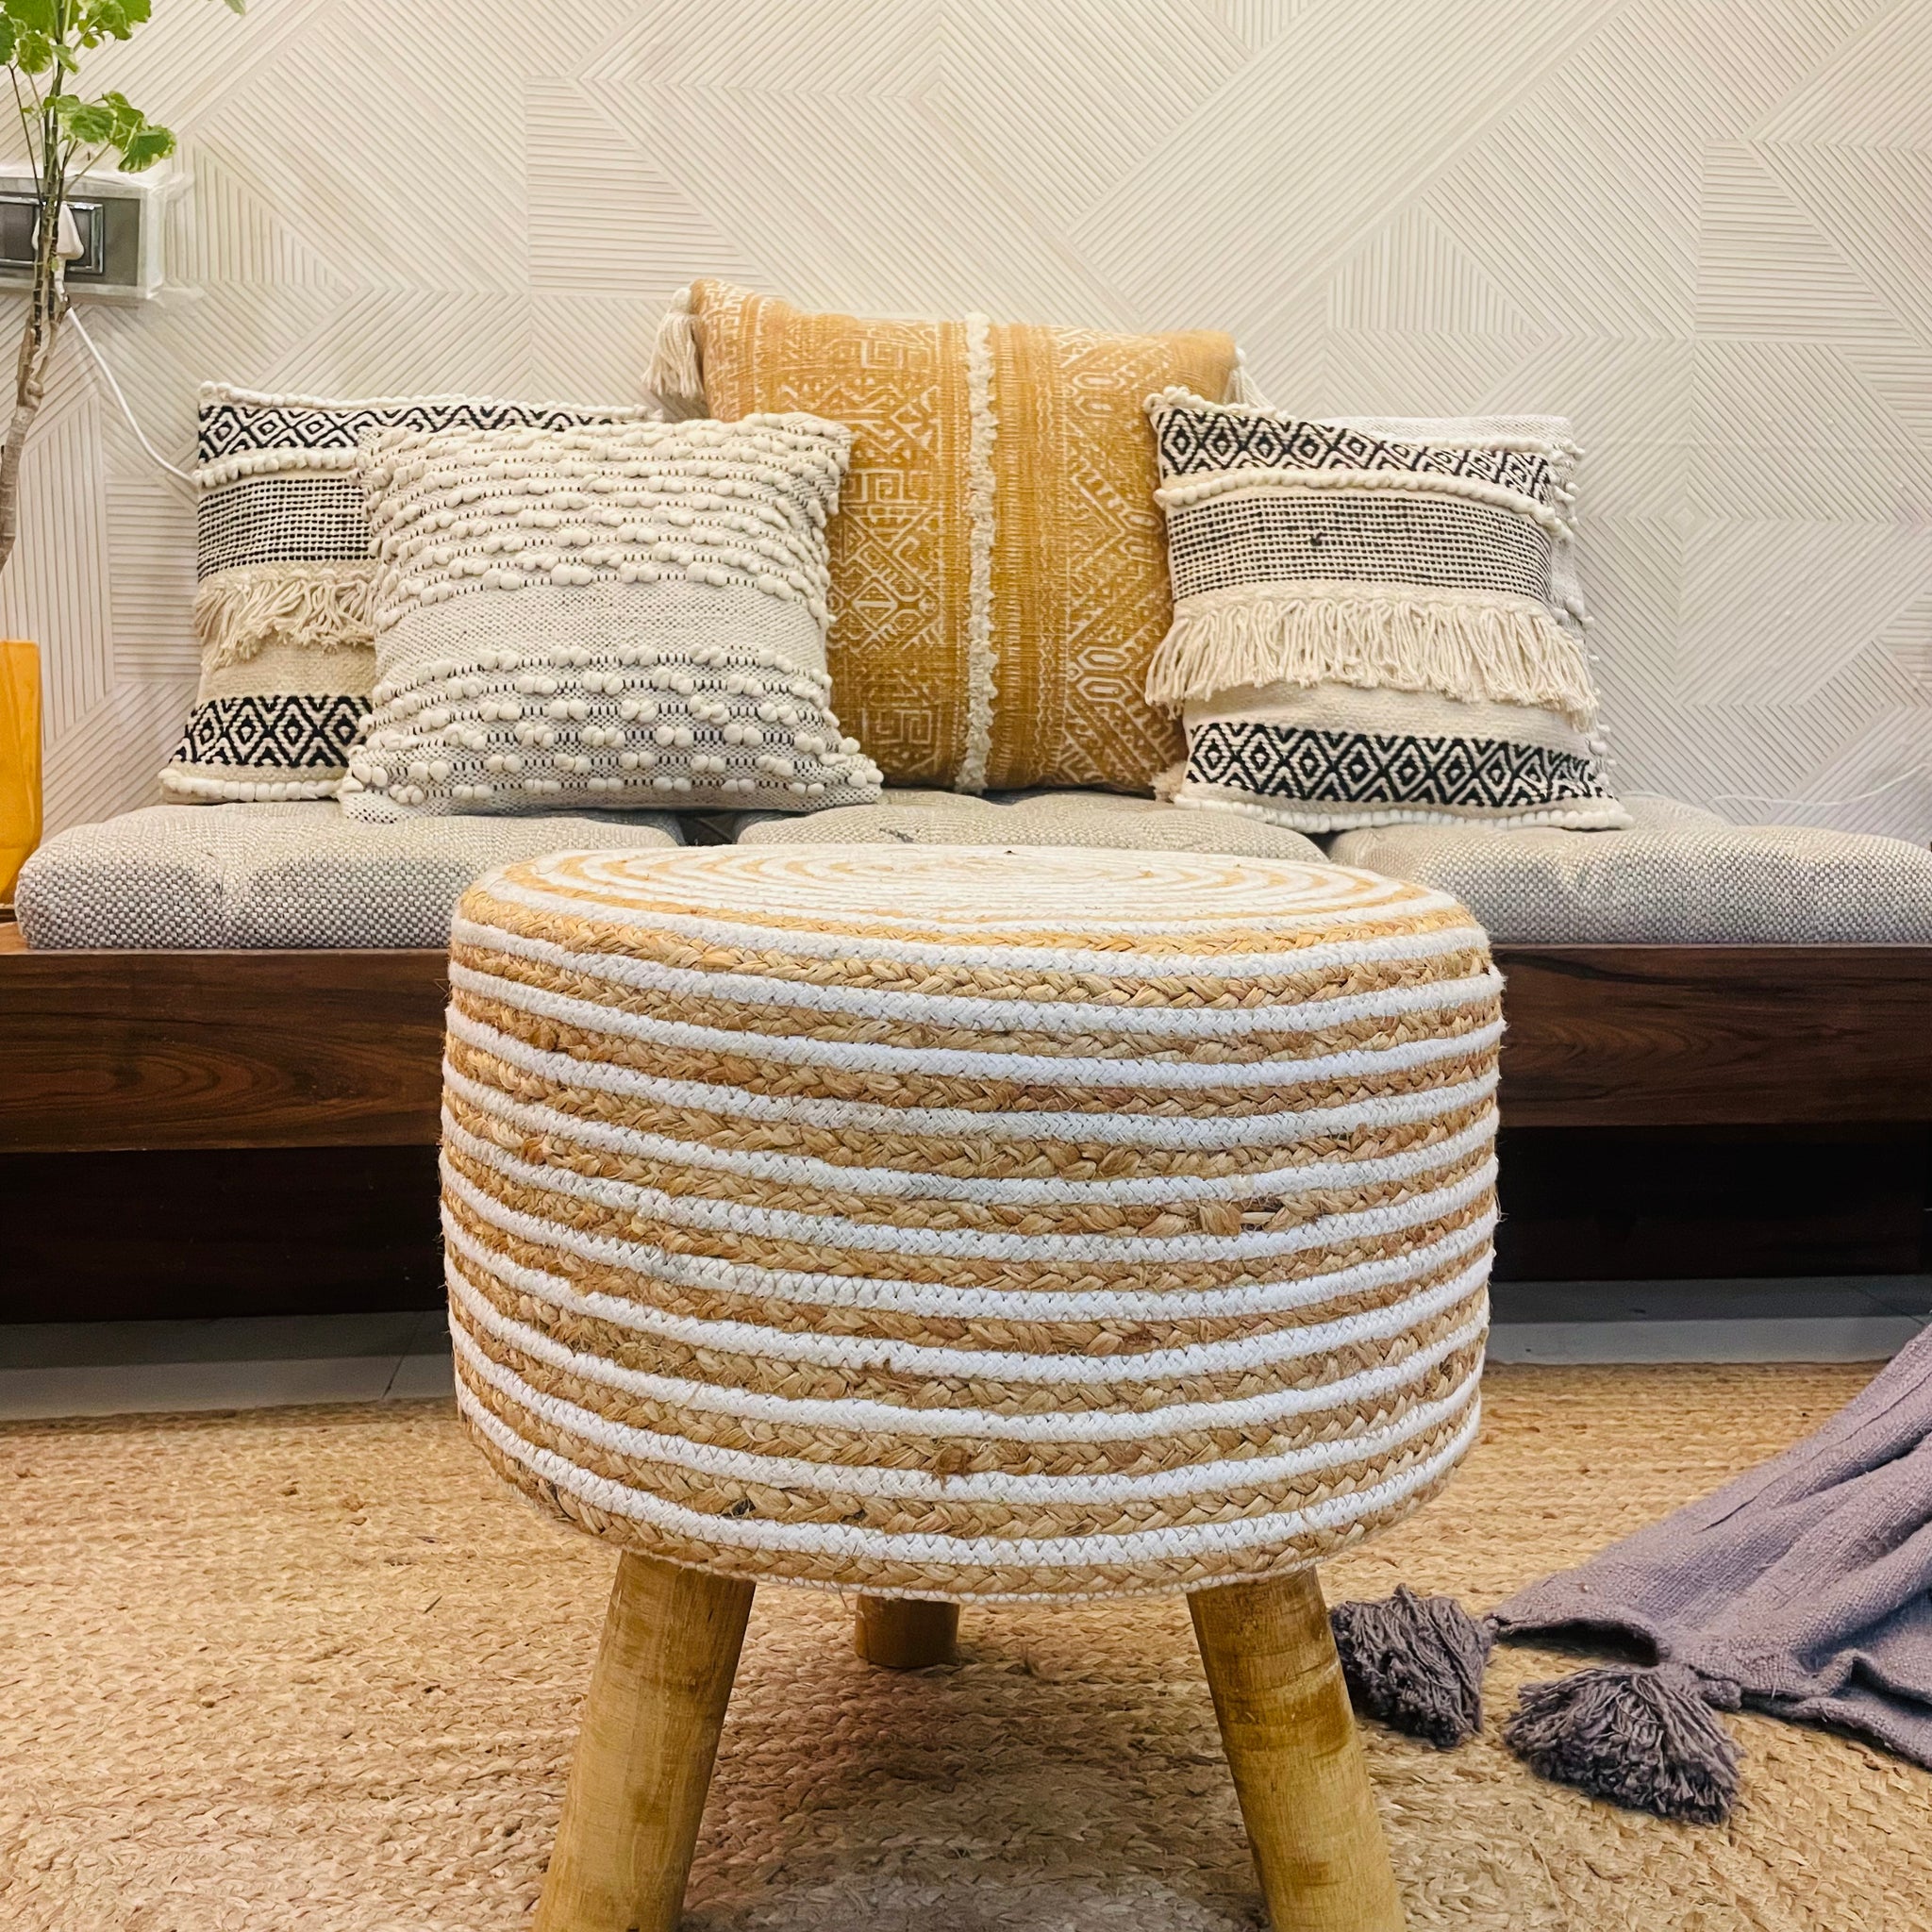  Accent chair footrest, Bohemian stool, Braided stool, Decorative stool, End table stool, Handcrafted stool, Jute-covered stool, Living room seating, Multi-functional stool, Natural materials stool, Ottoman with wooden legs, Side table stool, Unique room addition, Wooden legs stool, Woven stool, tesu